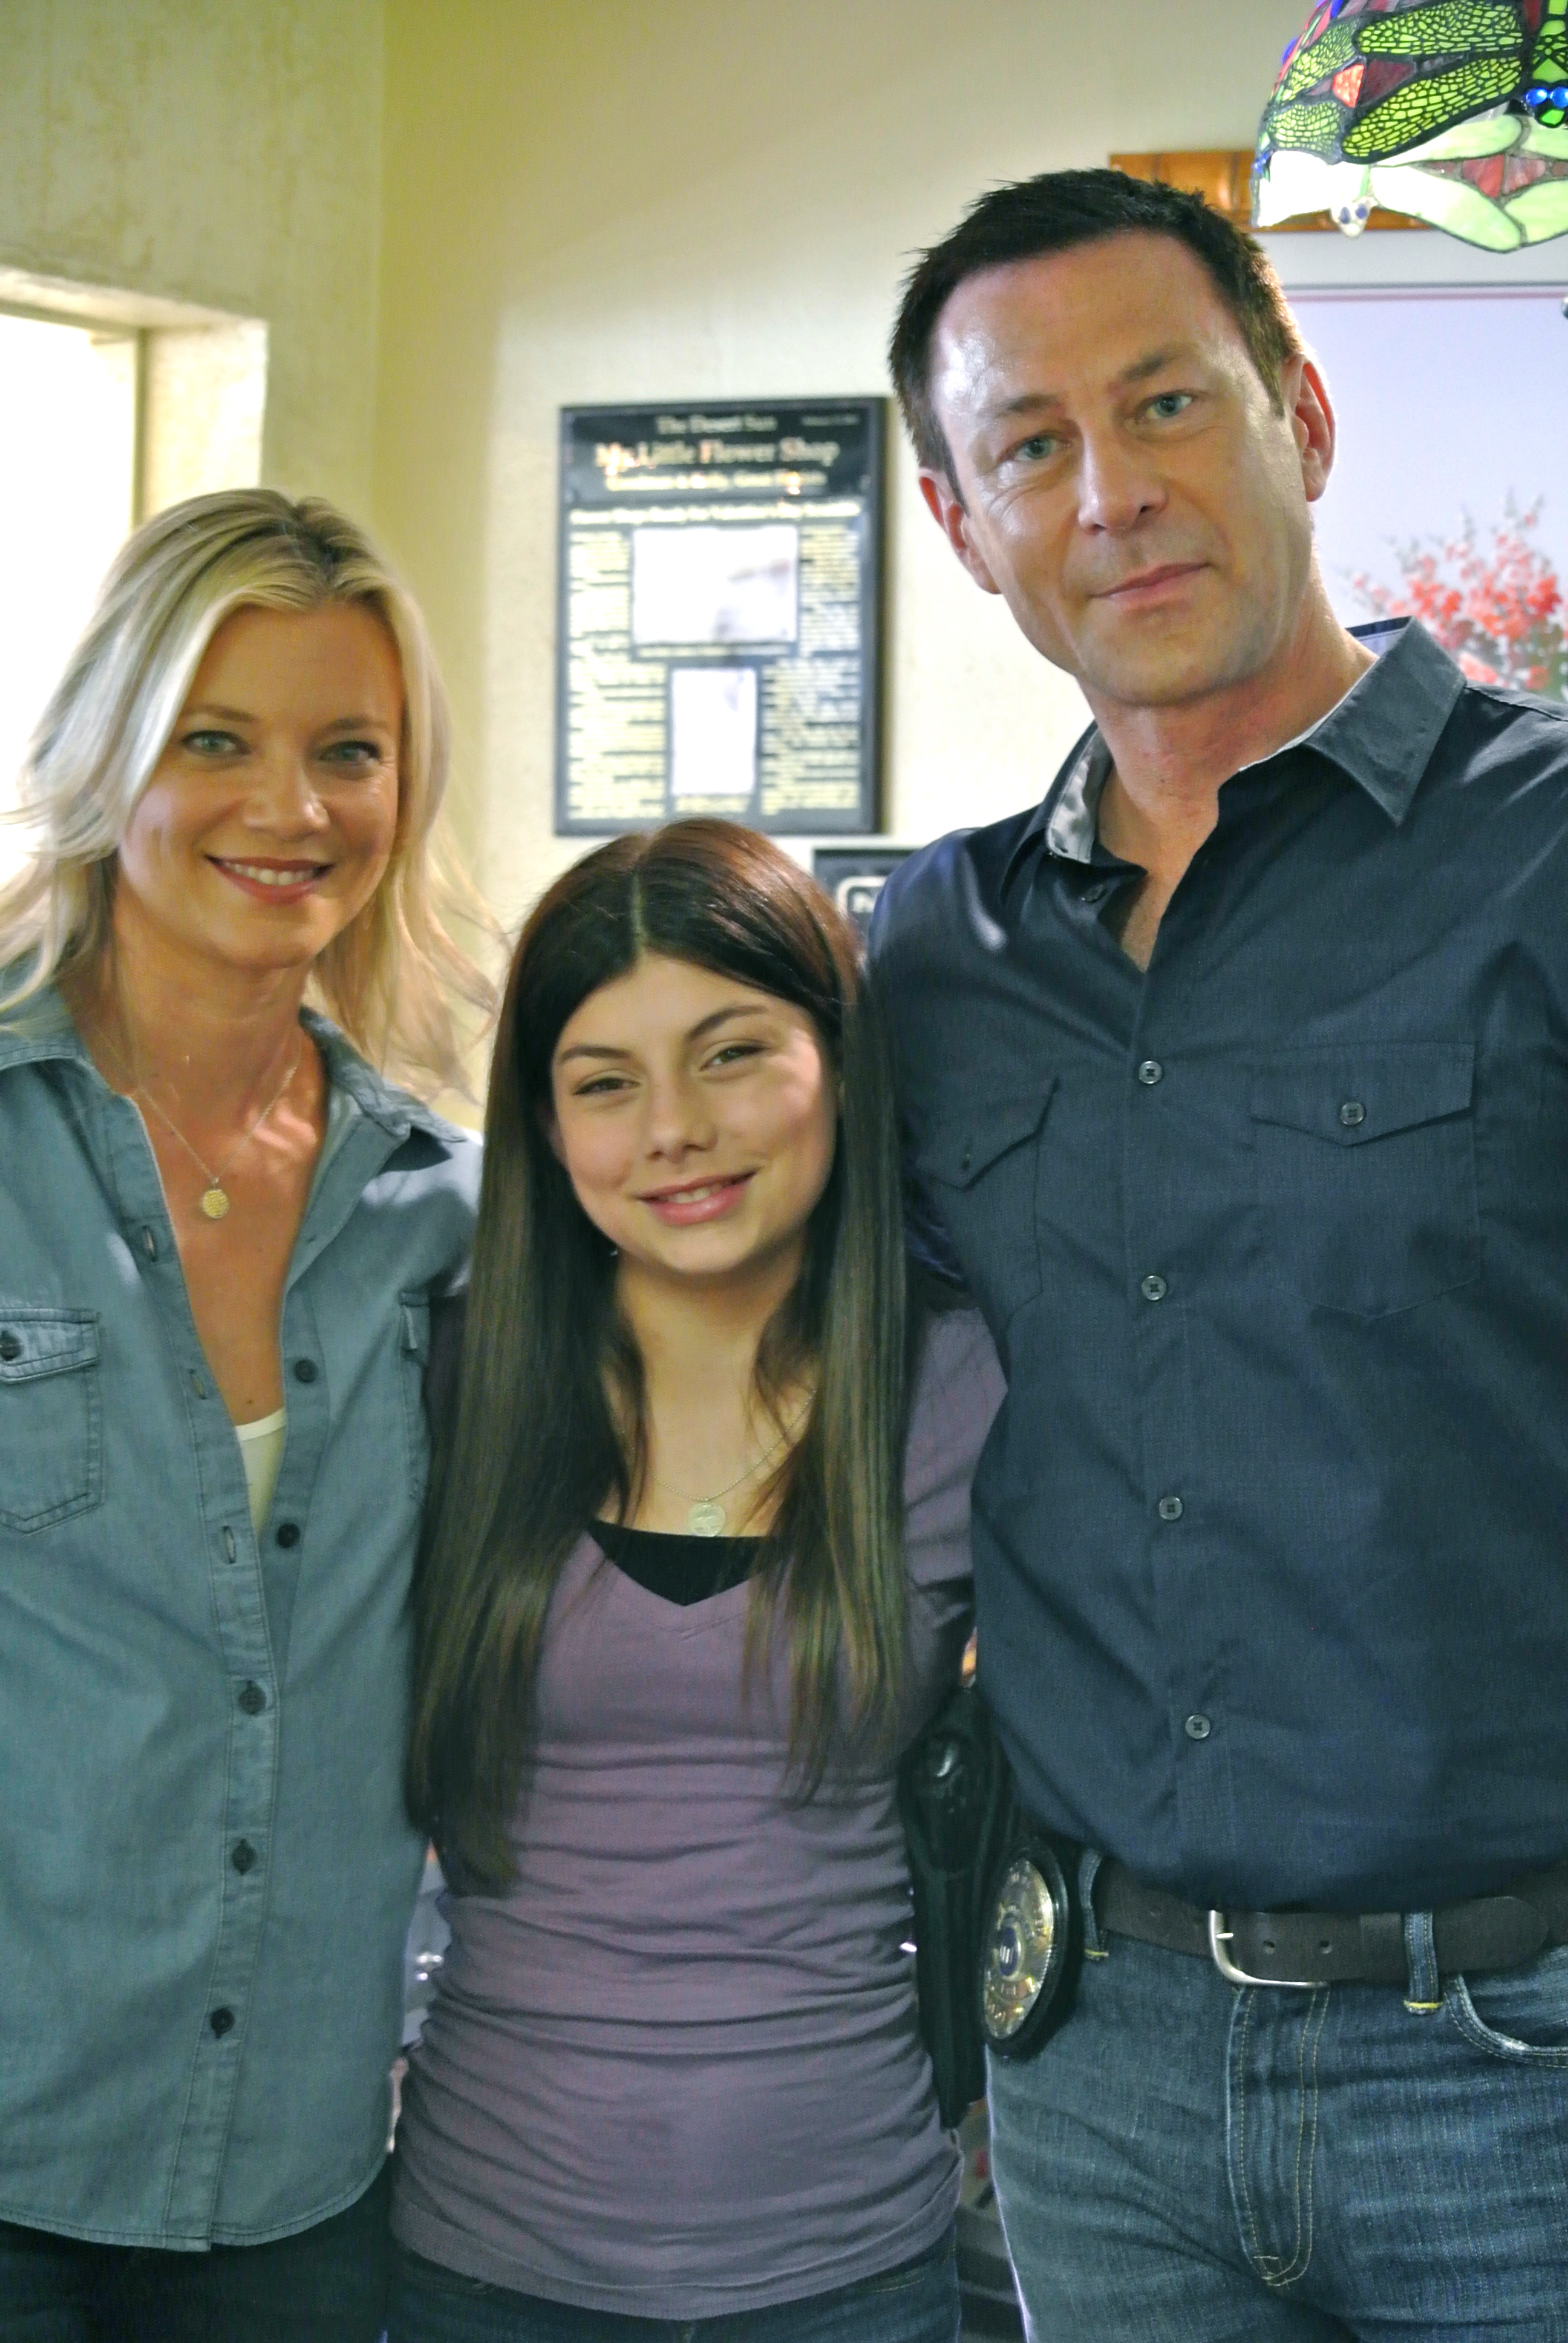 Cassidy Mack, Amy Smart & Grant Bowler on the set of 